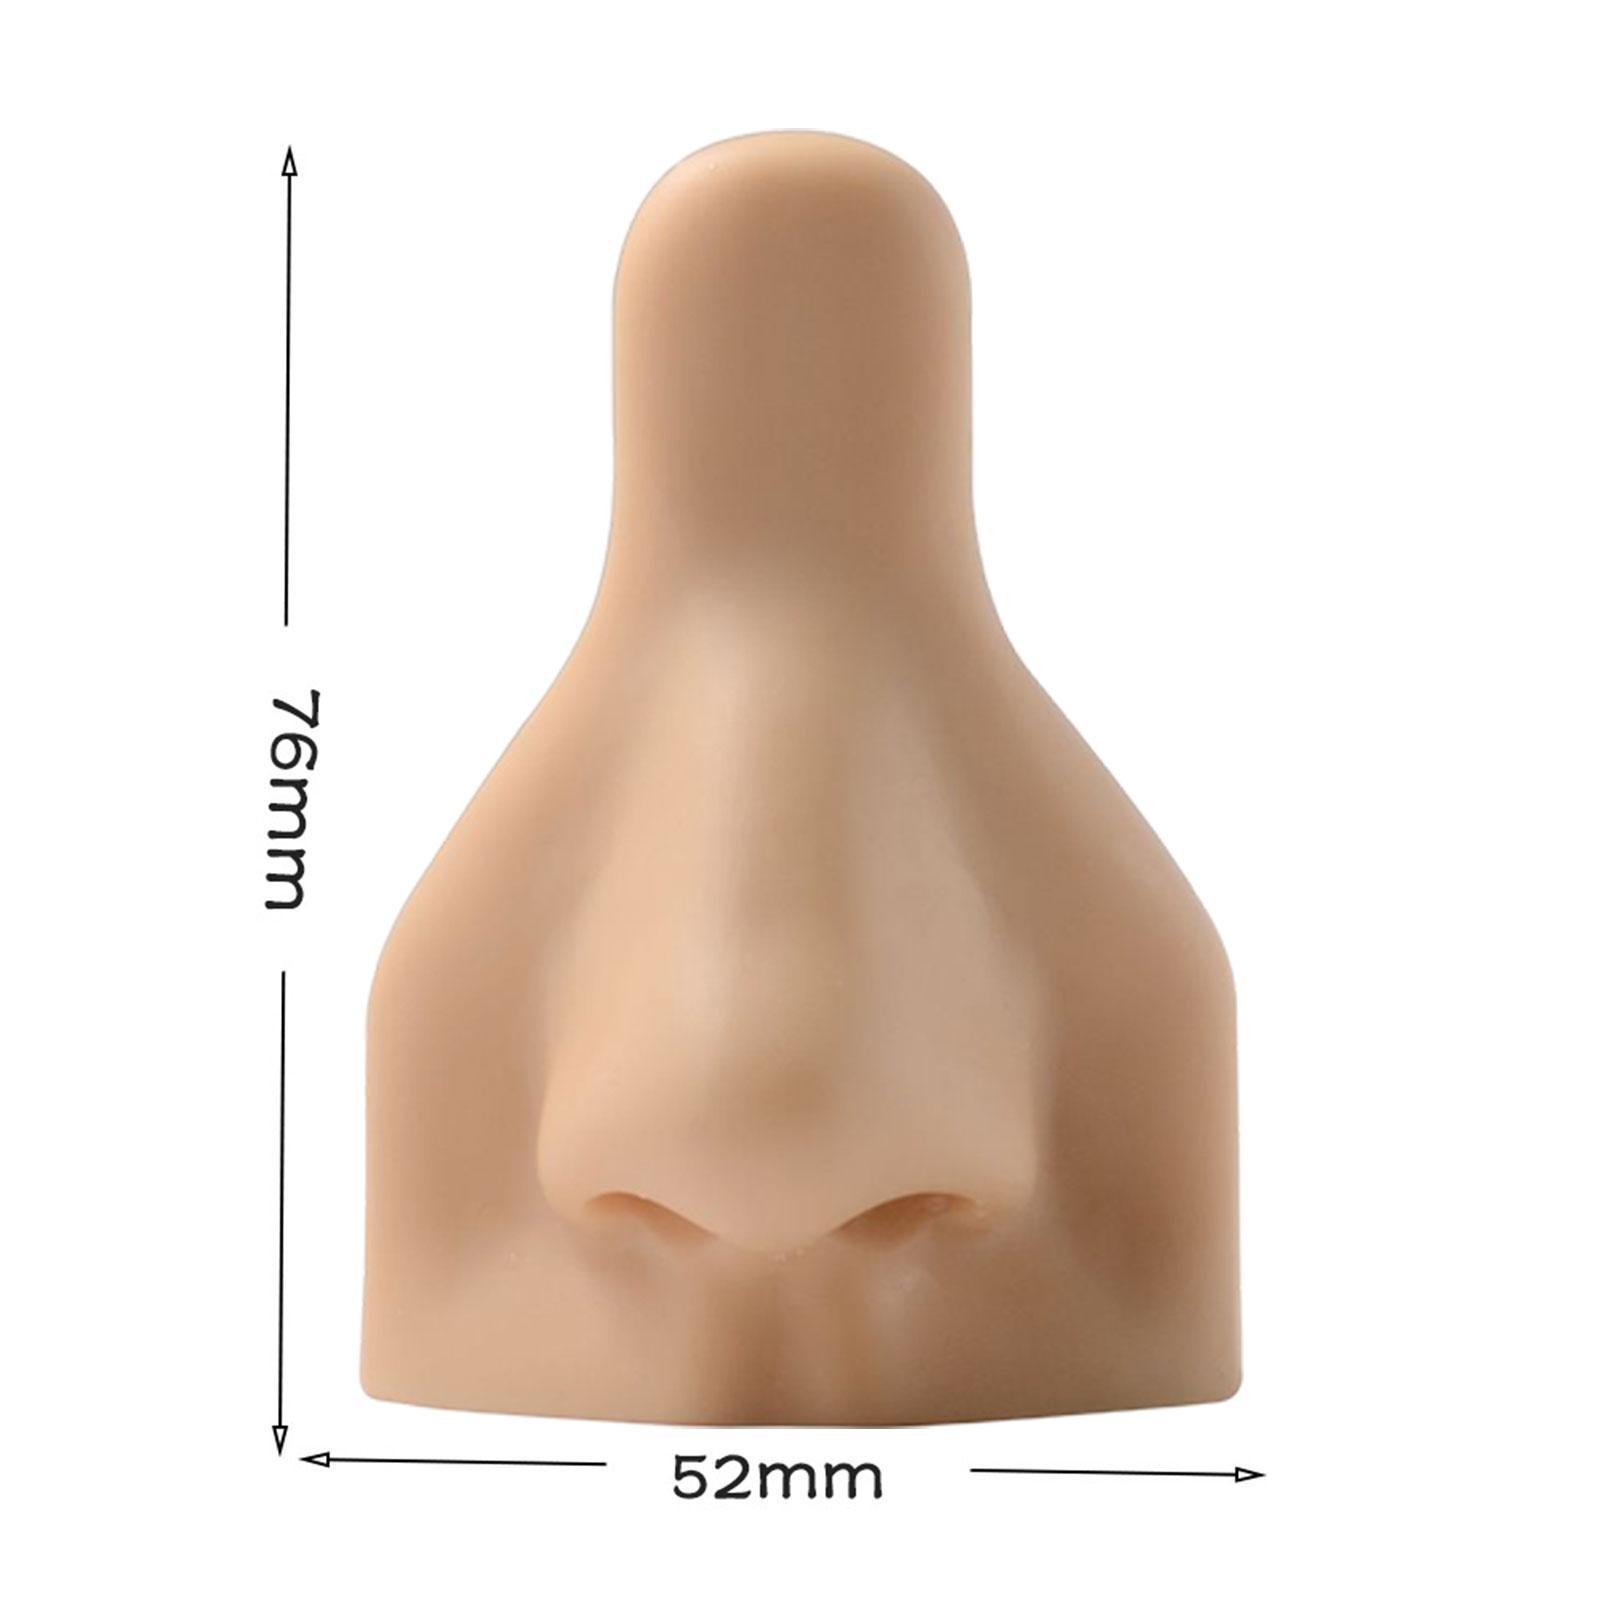 Soft Silicone Nose Model Simulation Reusable Flexible for Piercing Practice Skin